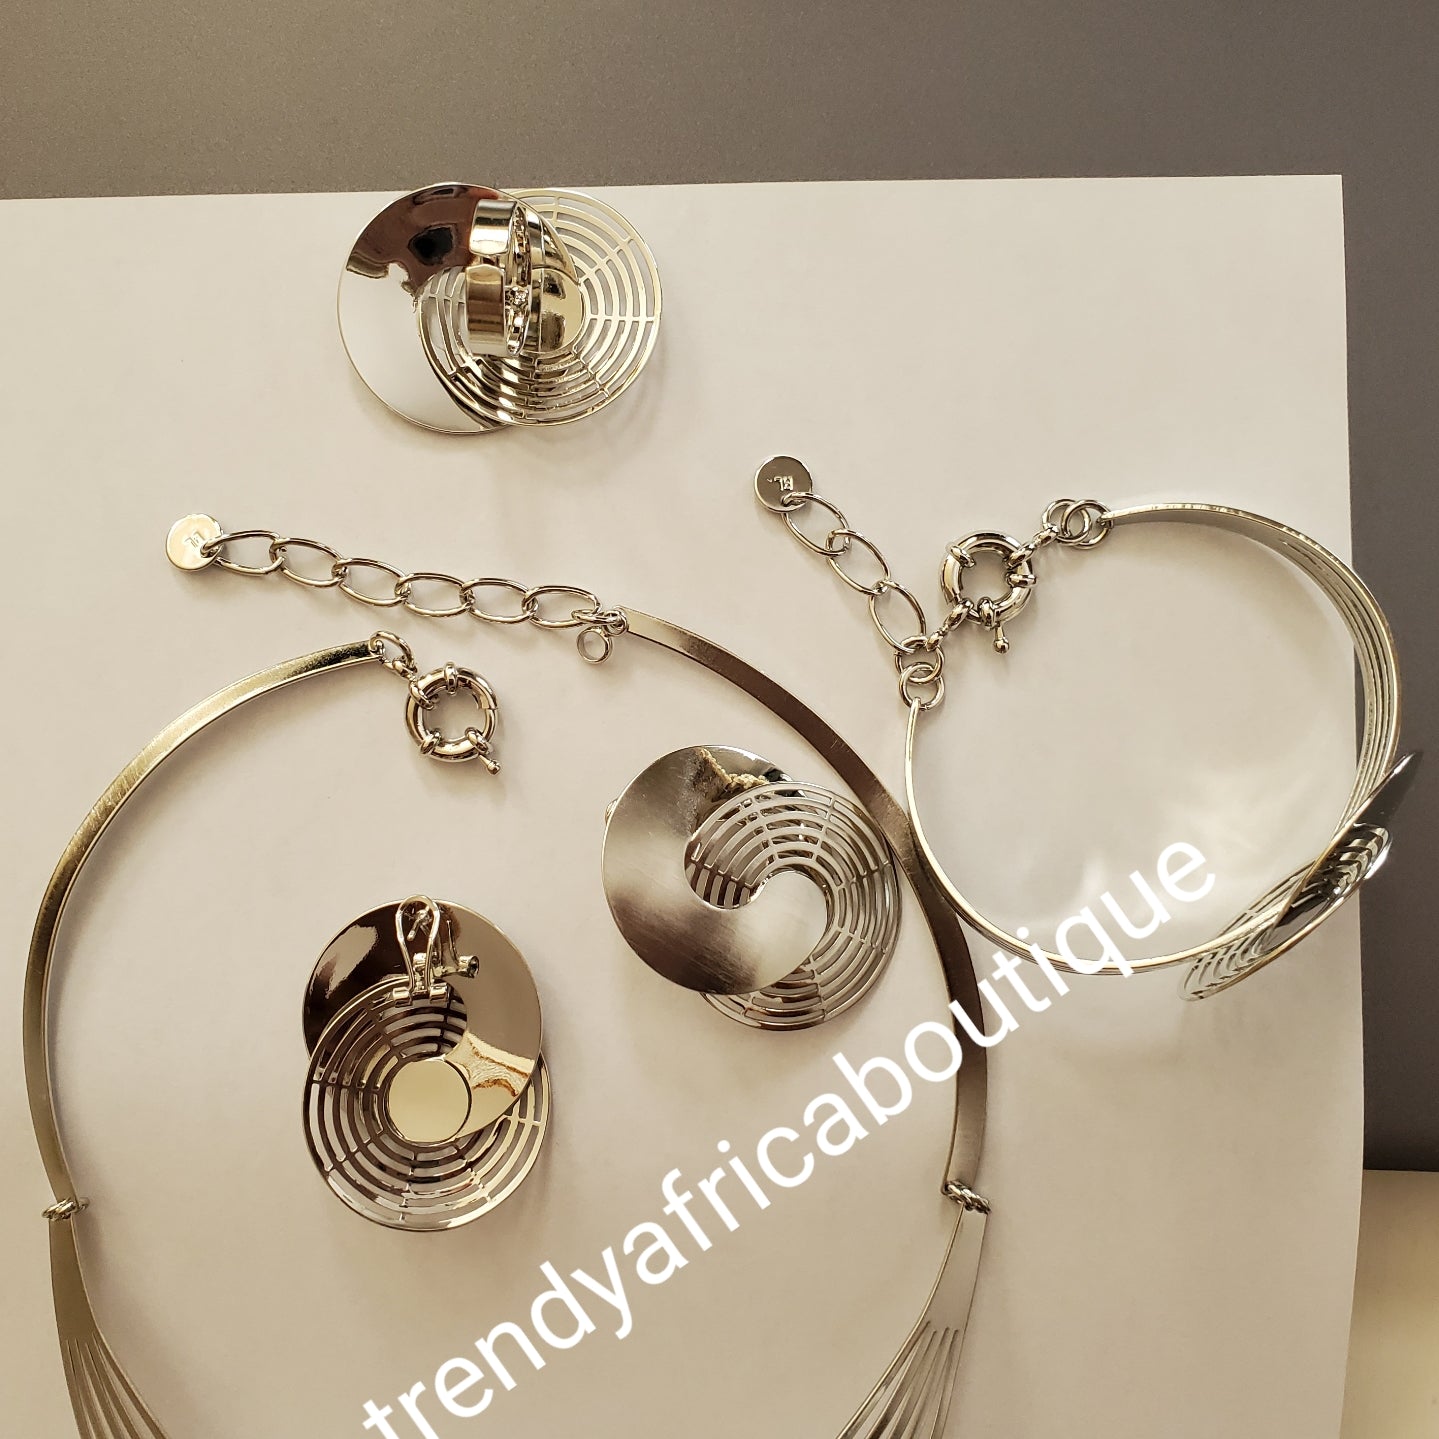 New arrival 4pcs 18k Silver  electroplated  Dubai Necklace set, earrings, adjustable bangle and ring. Long lasting hypoallergenic plating. Sold as a set